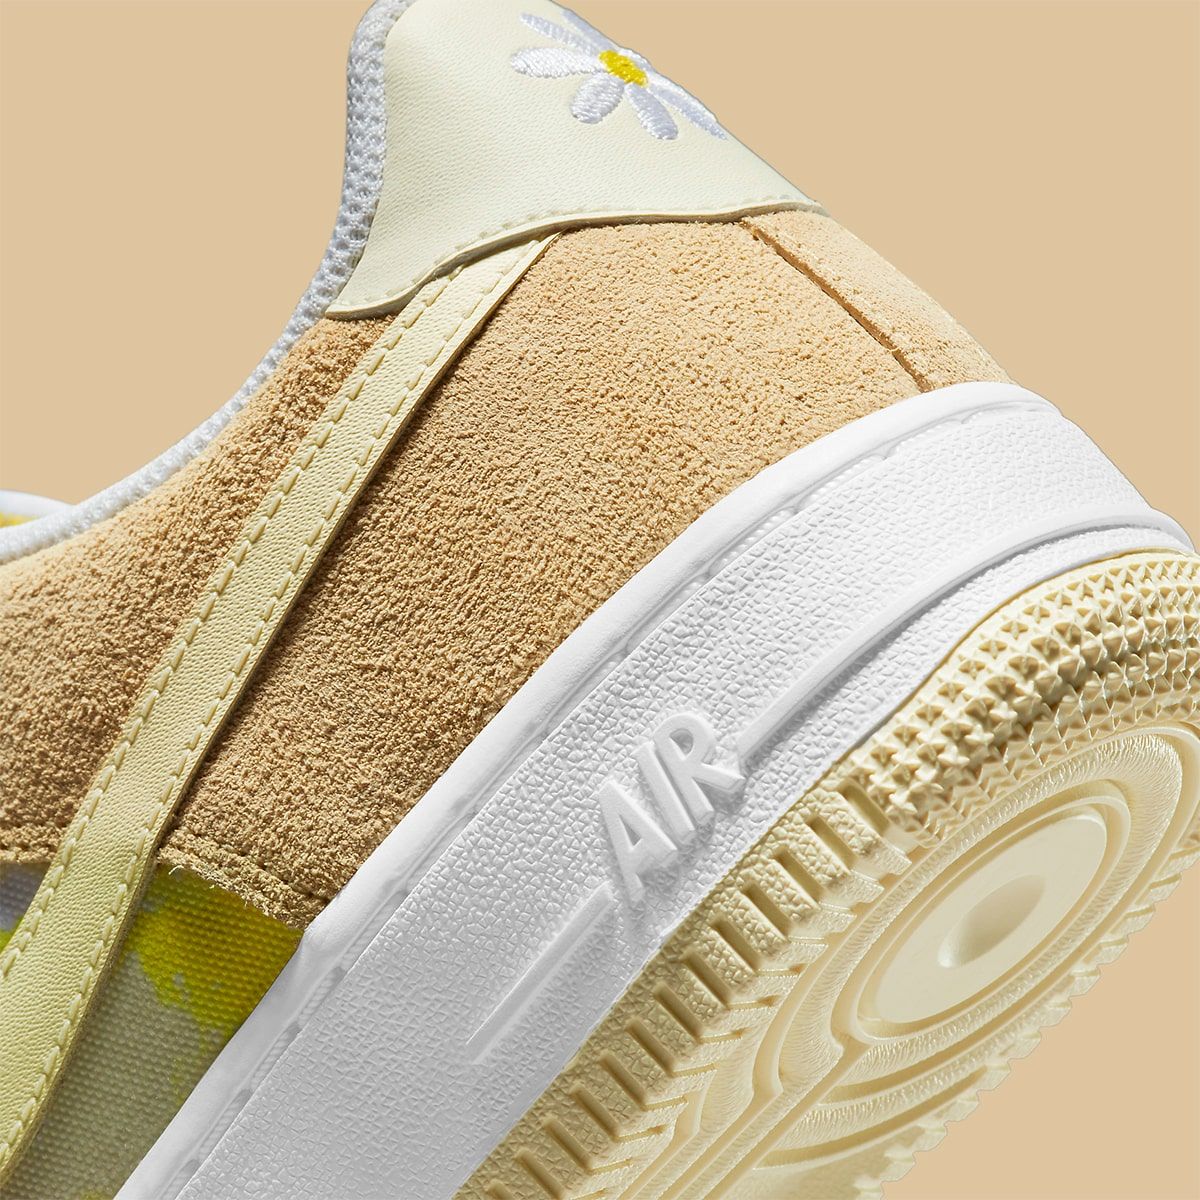 New Kids Air Force 1 is Perfect for Summer-to-Fall Transition | HOUSE ...